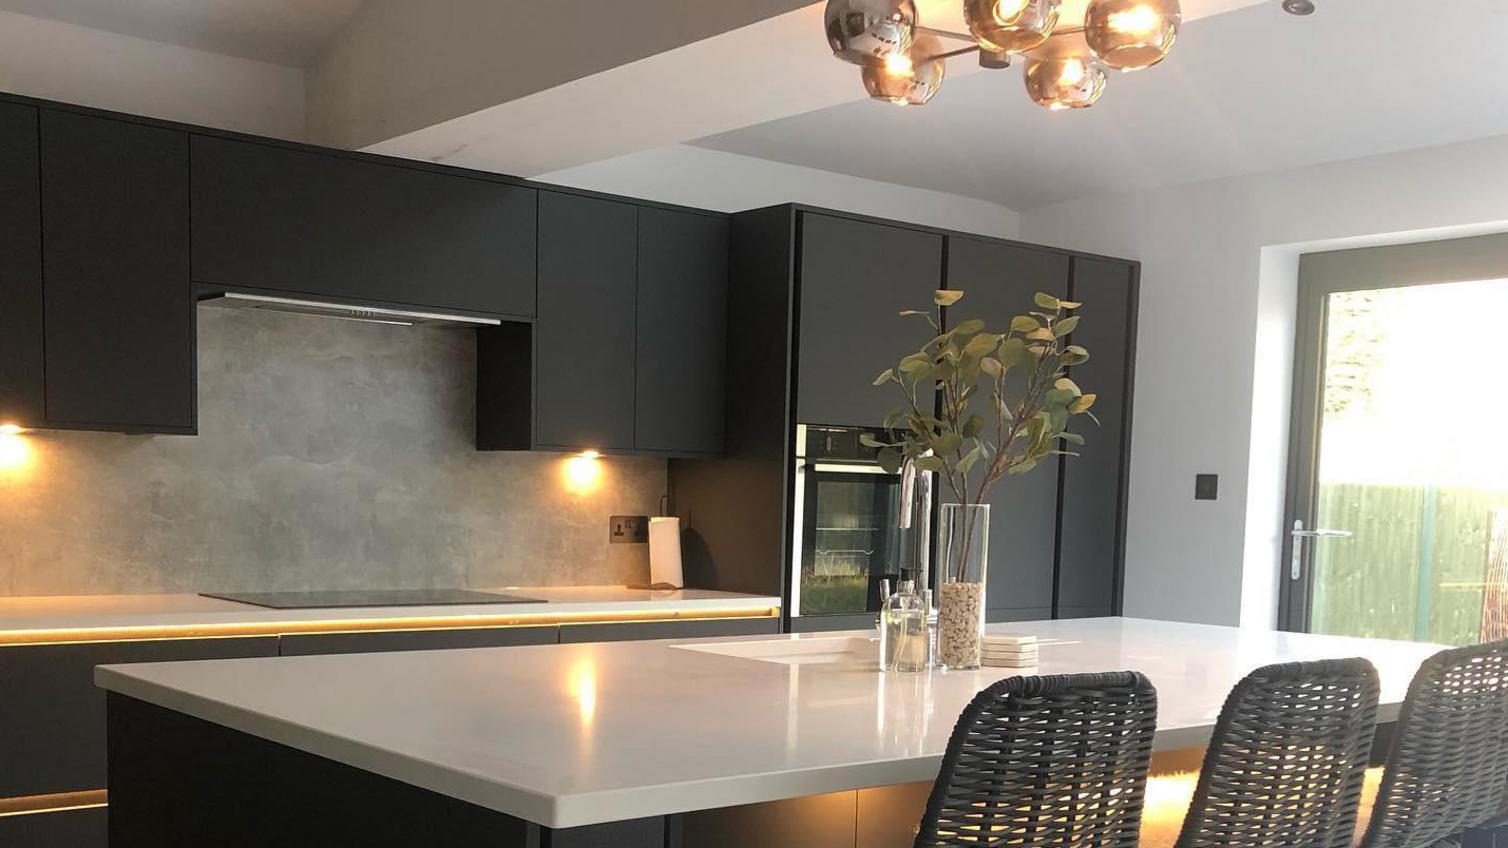 Black handleless kitchen with stone worktops and downlights for lighting